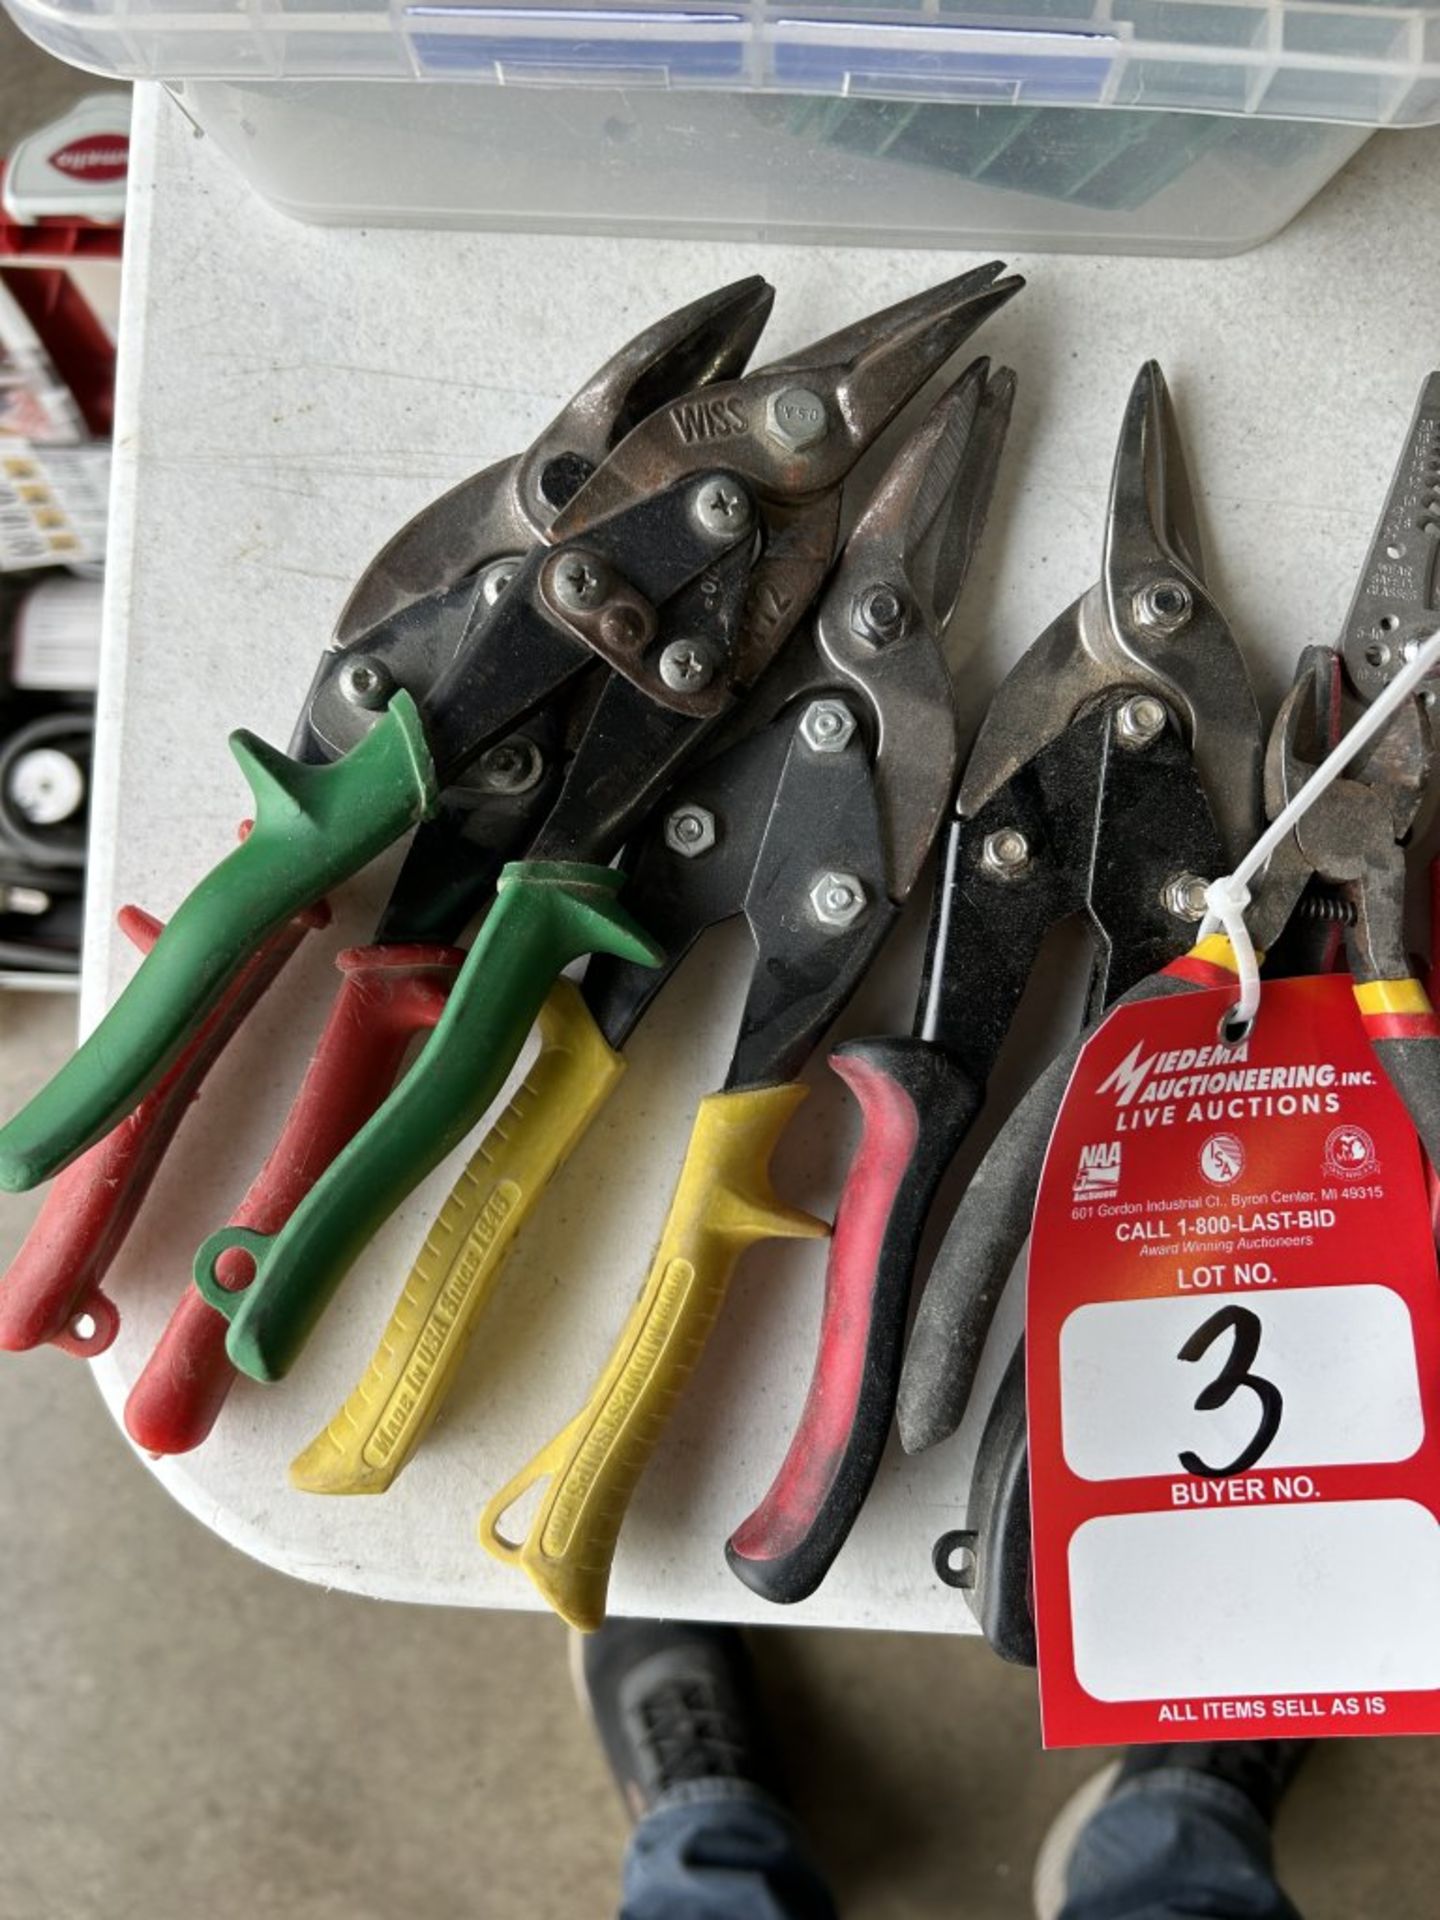 ASSORTED TOOLS INCLUDING PLIERS, TIN SNIPS, SCREWDRIVERS, RAZOR-BLADES, ETC. - Image 4 of 7